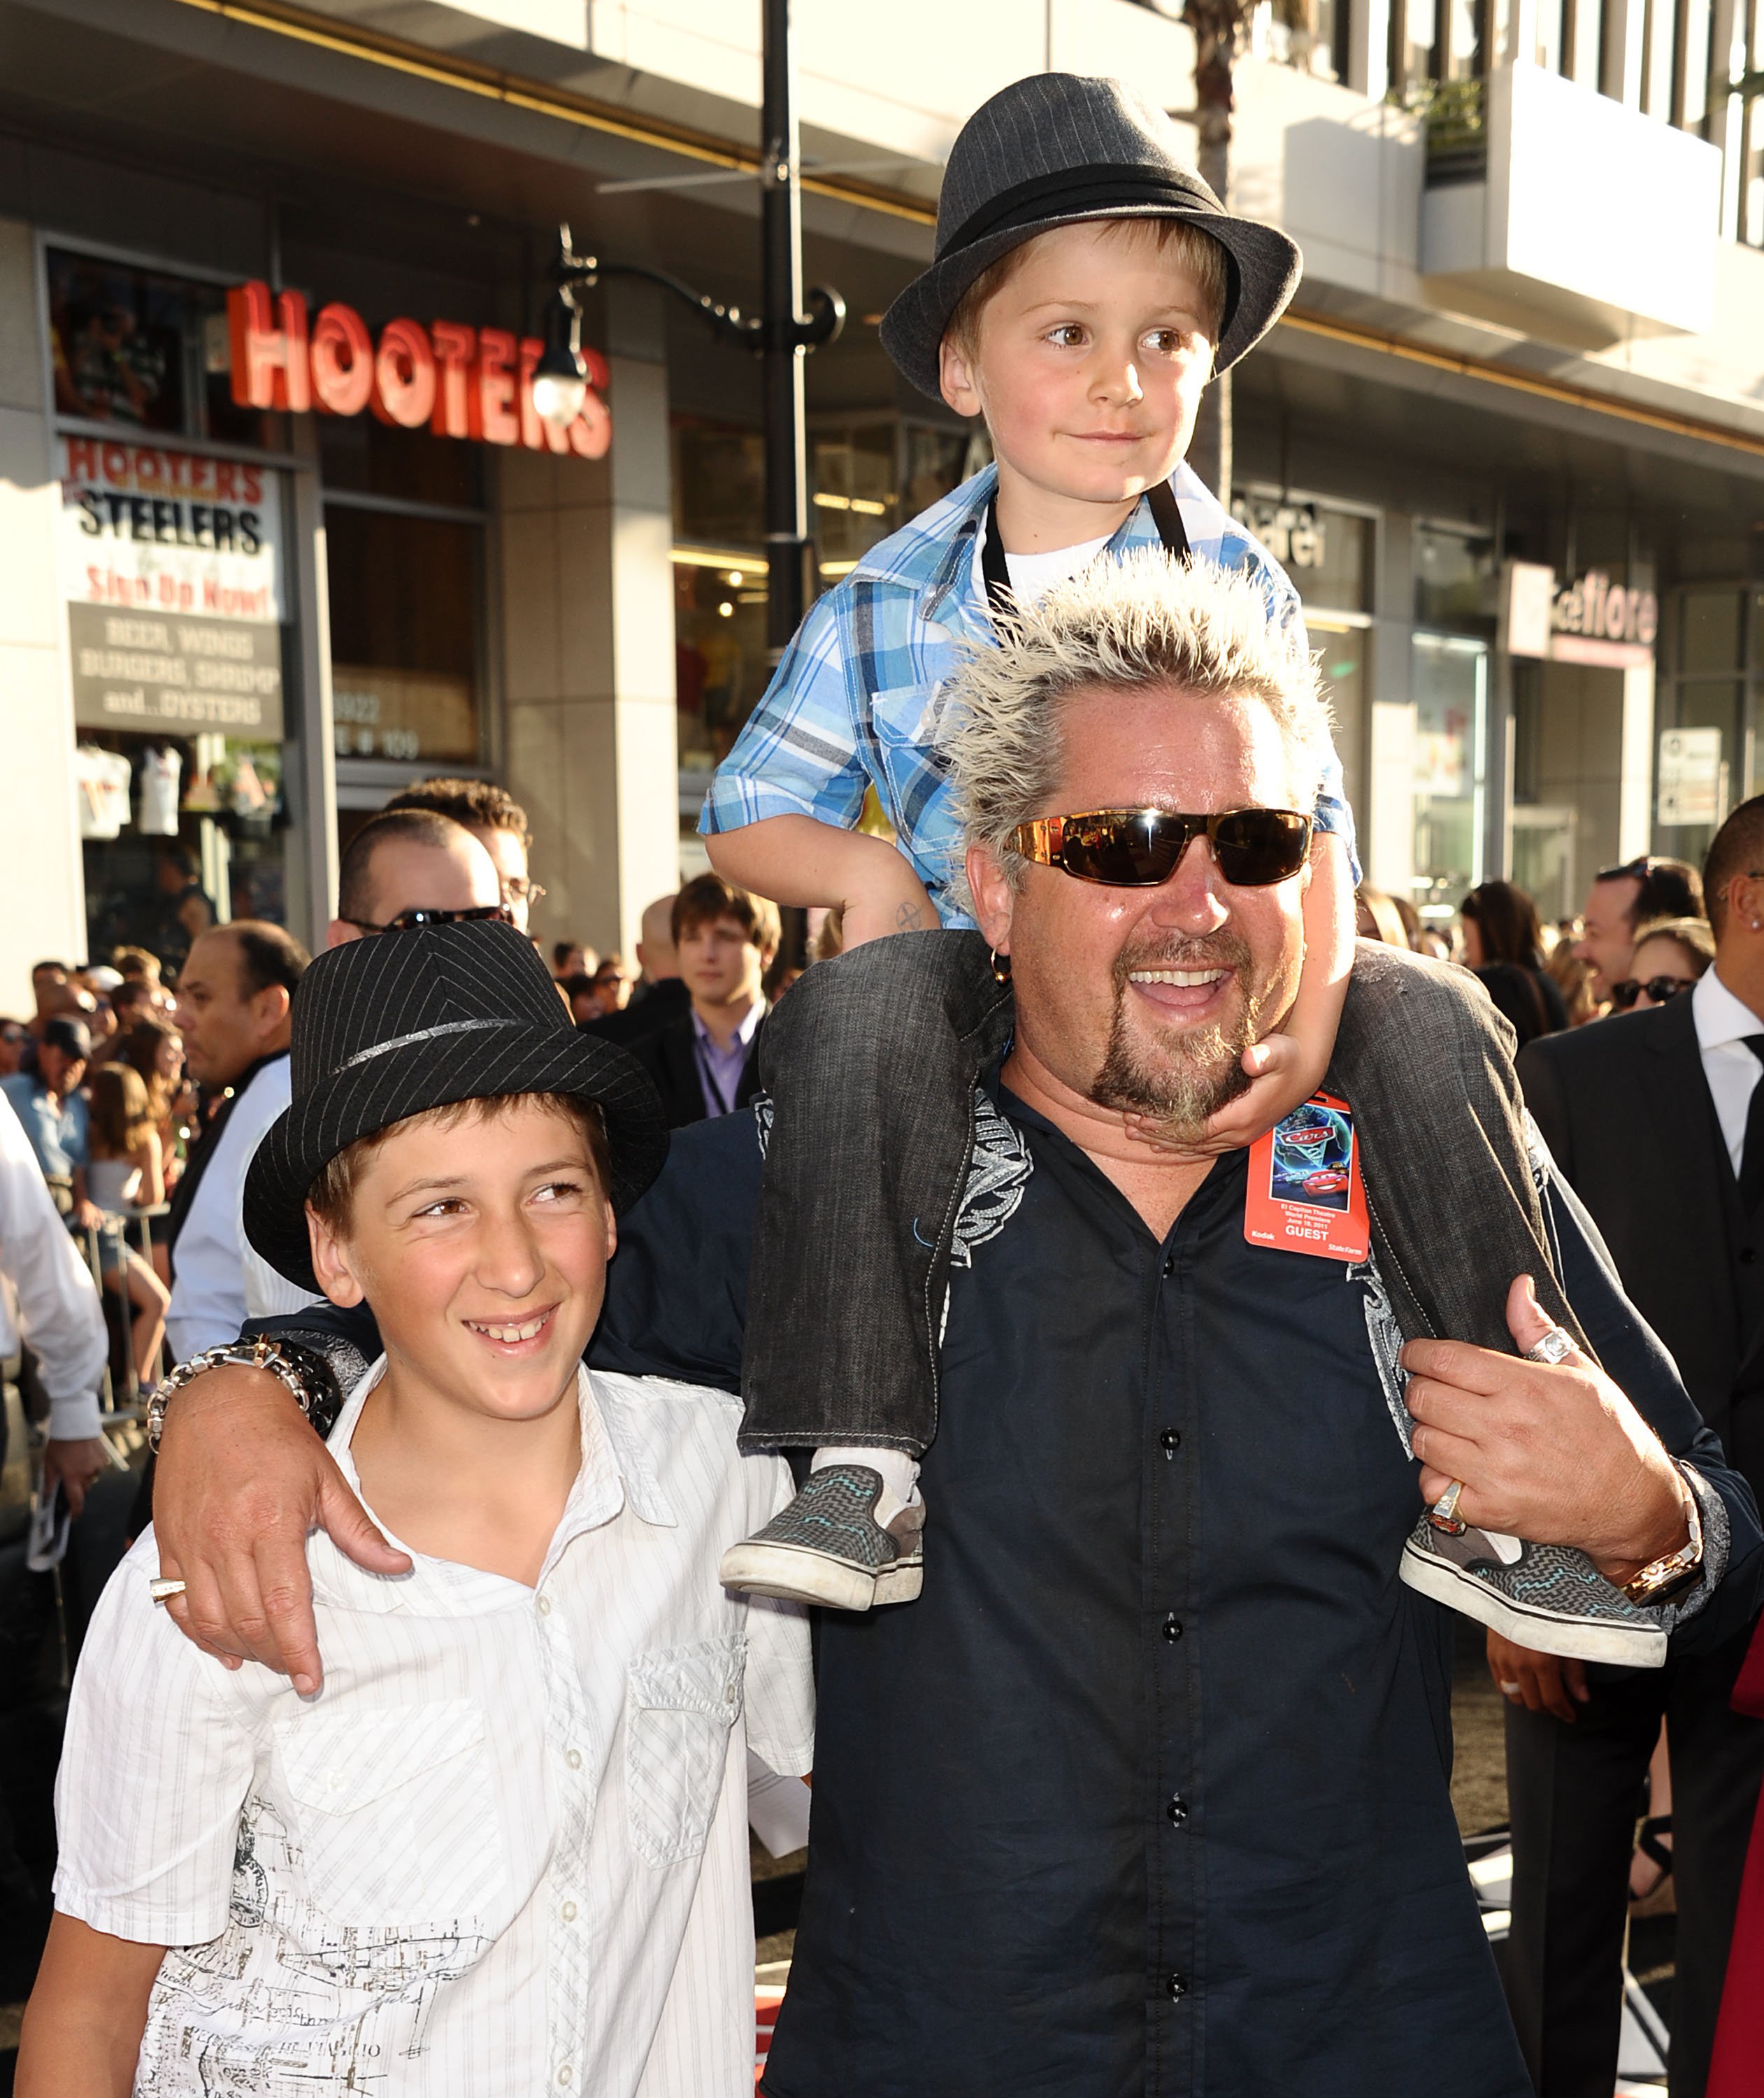 Guy Fieri and his sons Ryder and Hunter Fieri at the premiere of "Cars 2" on June 18, 2011, in Hollywood, California | Source: Getty Images